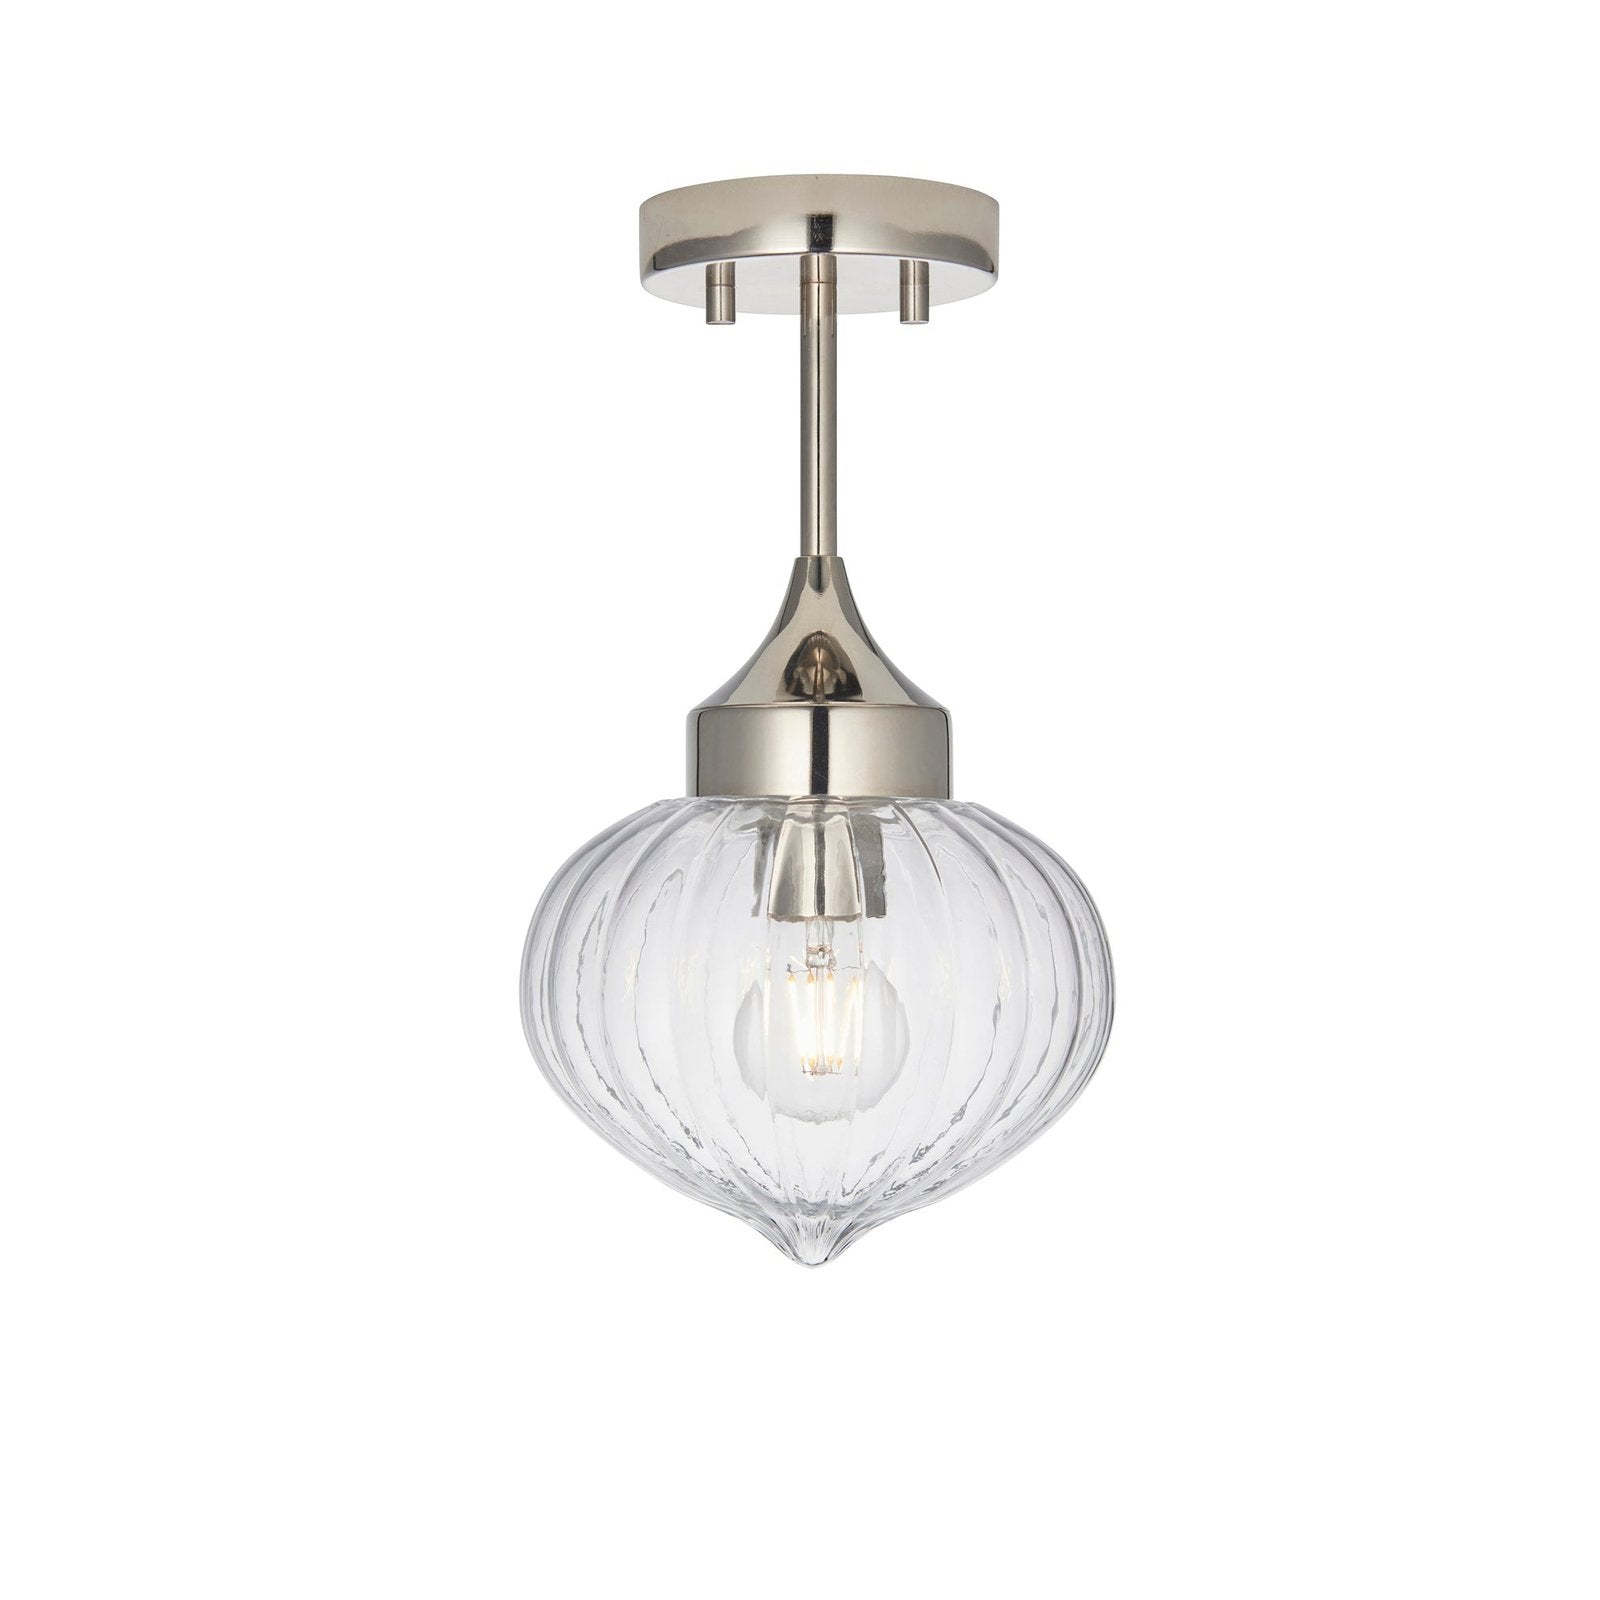 Brimstone Flush Ceiling Light E27 10W - Steel Plated - Ribbed Glass - Dimmable